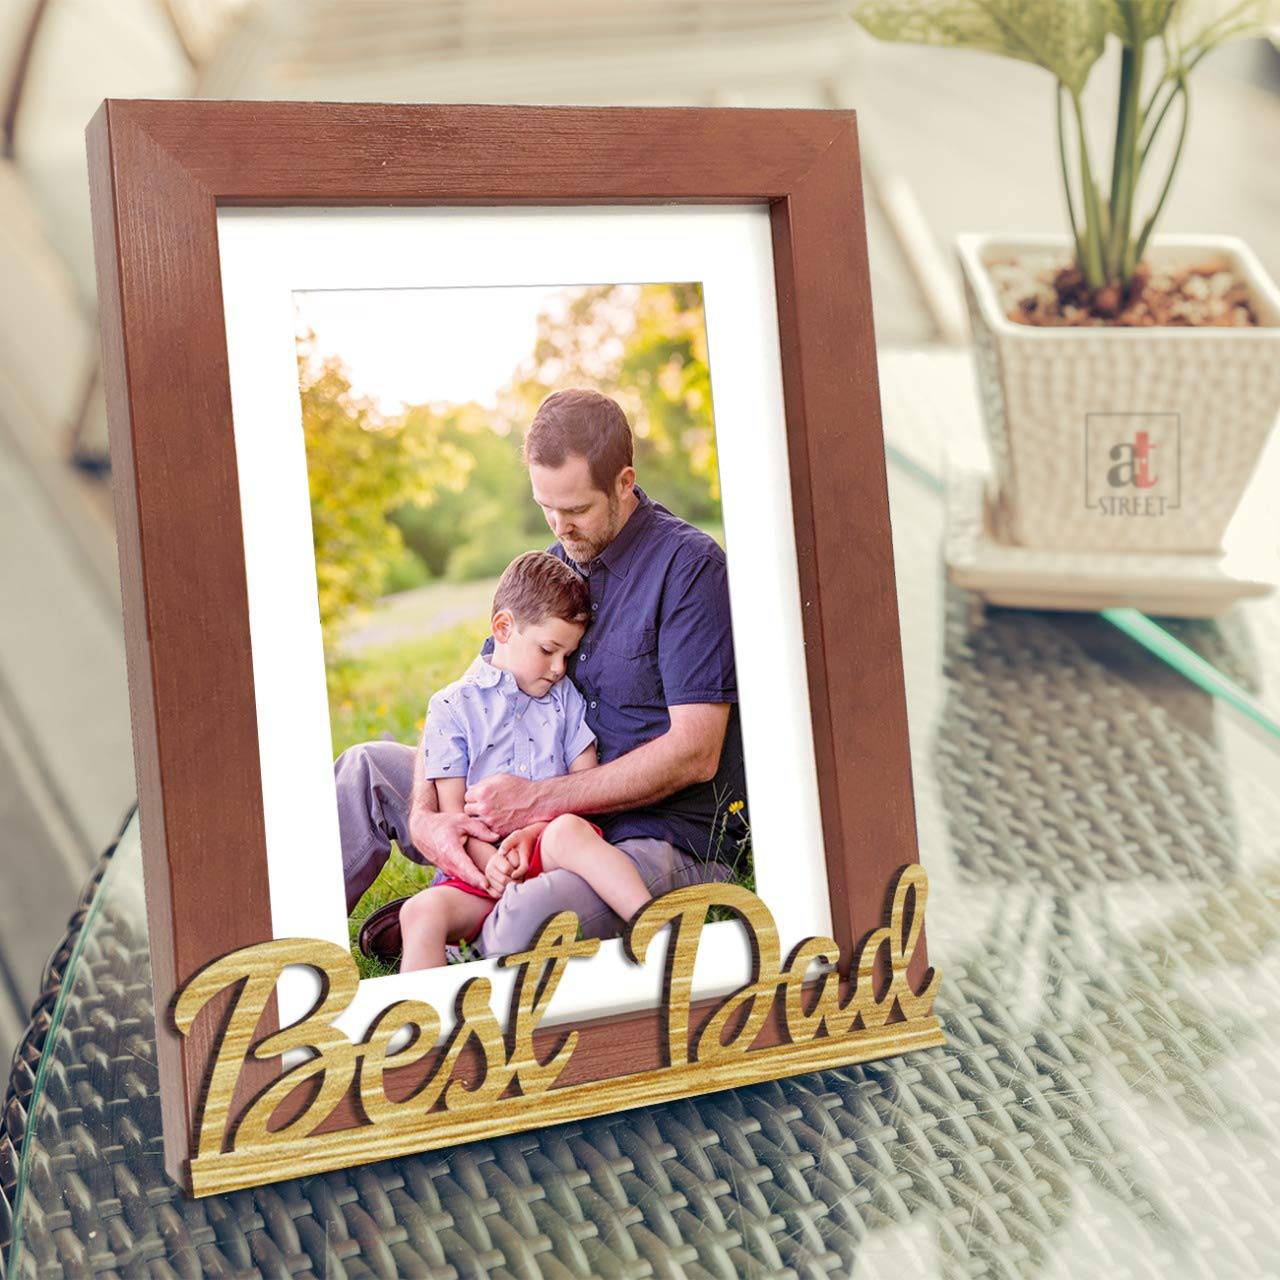 Art Street Best Dad Table Photo Frame for Father's Day (Brown and Beige, 6X8 Inches) - YuvaFlowers